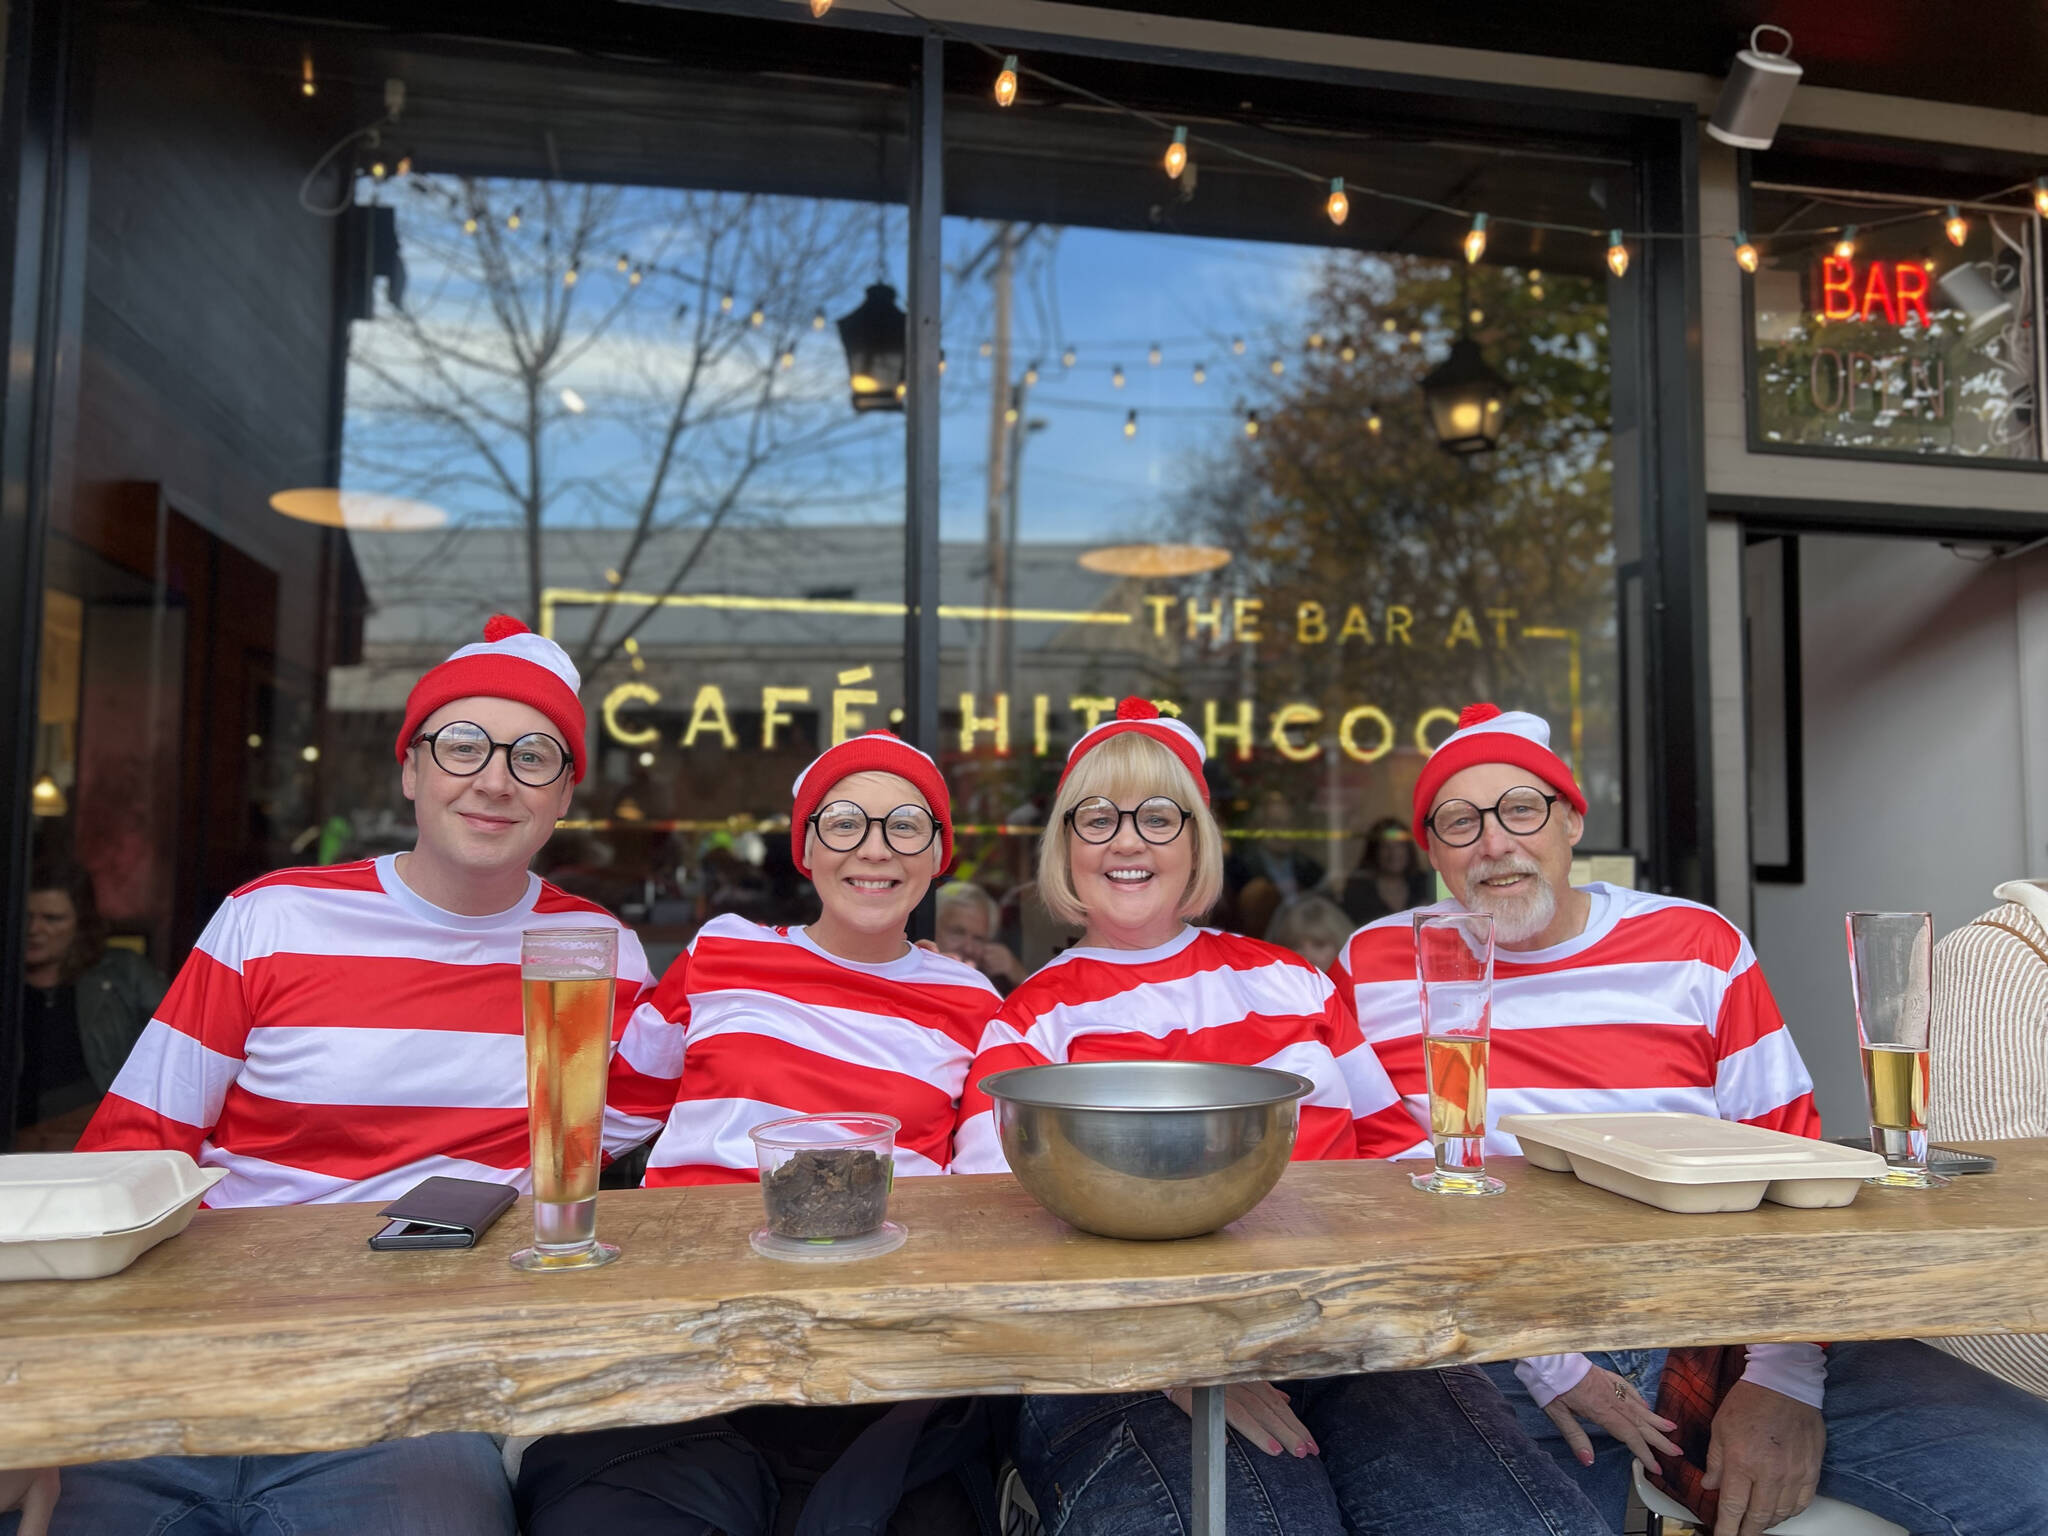 Waldo was spotted in front of the bar at Hitchcock.